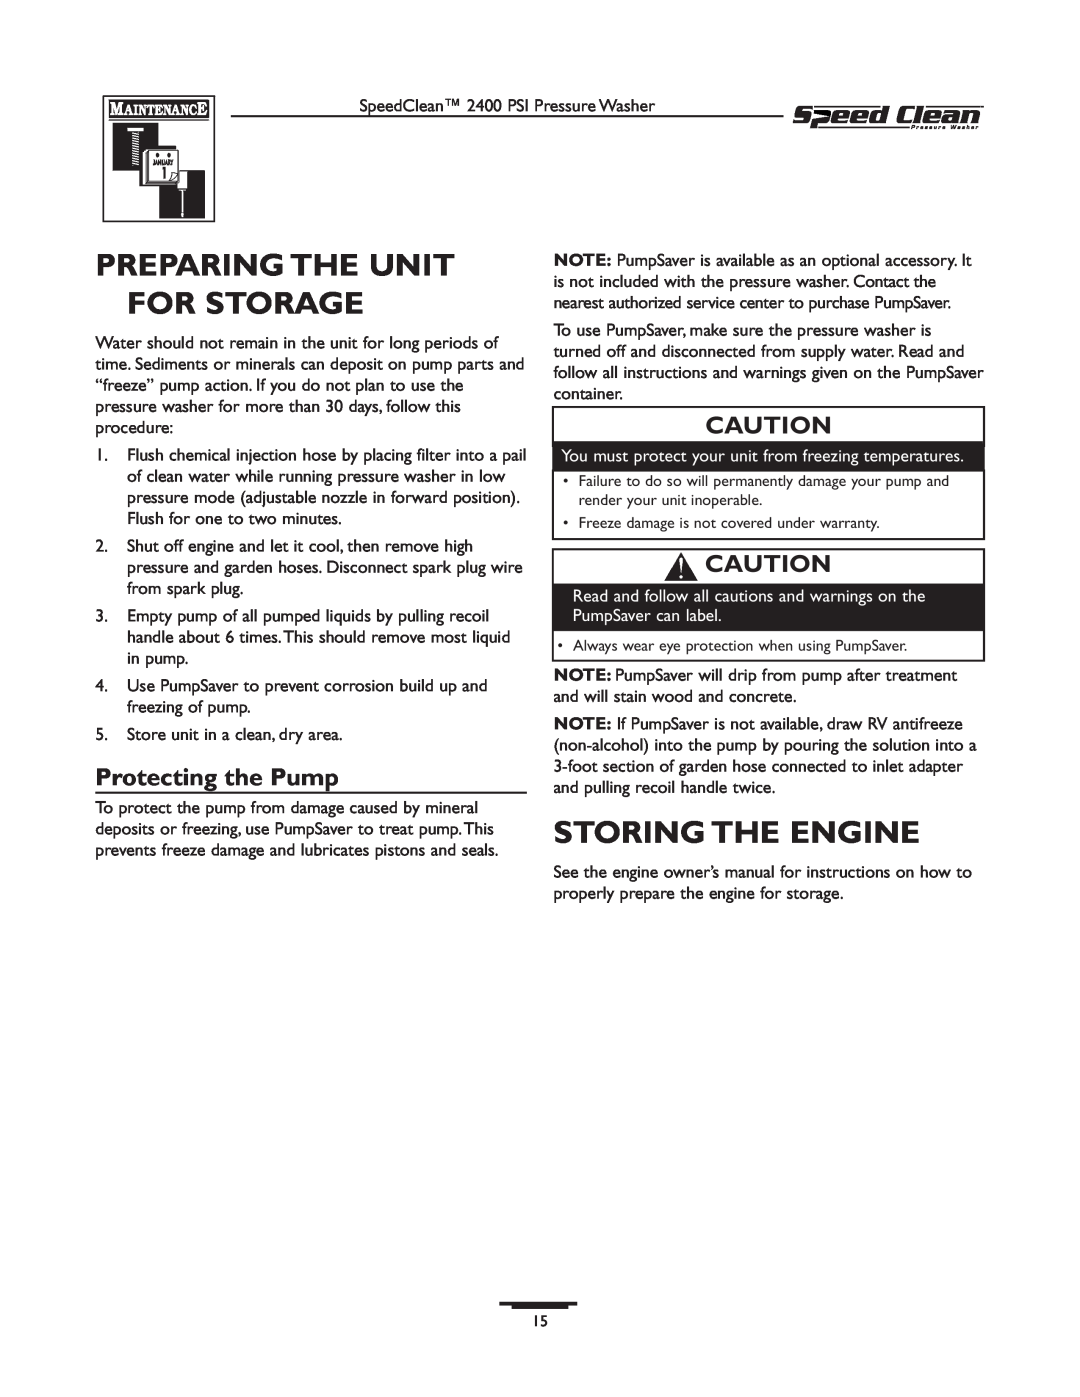 Briggs & Stratton 020227-0 owner manual Preparing The Unit For Storage, Storing The Engine, Protecting the Pump 